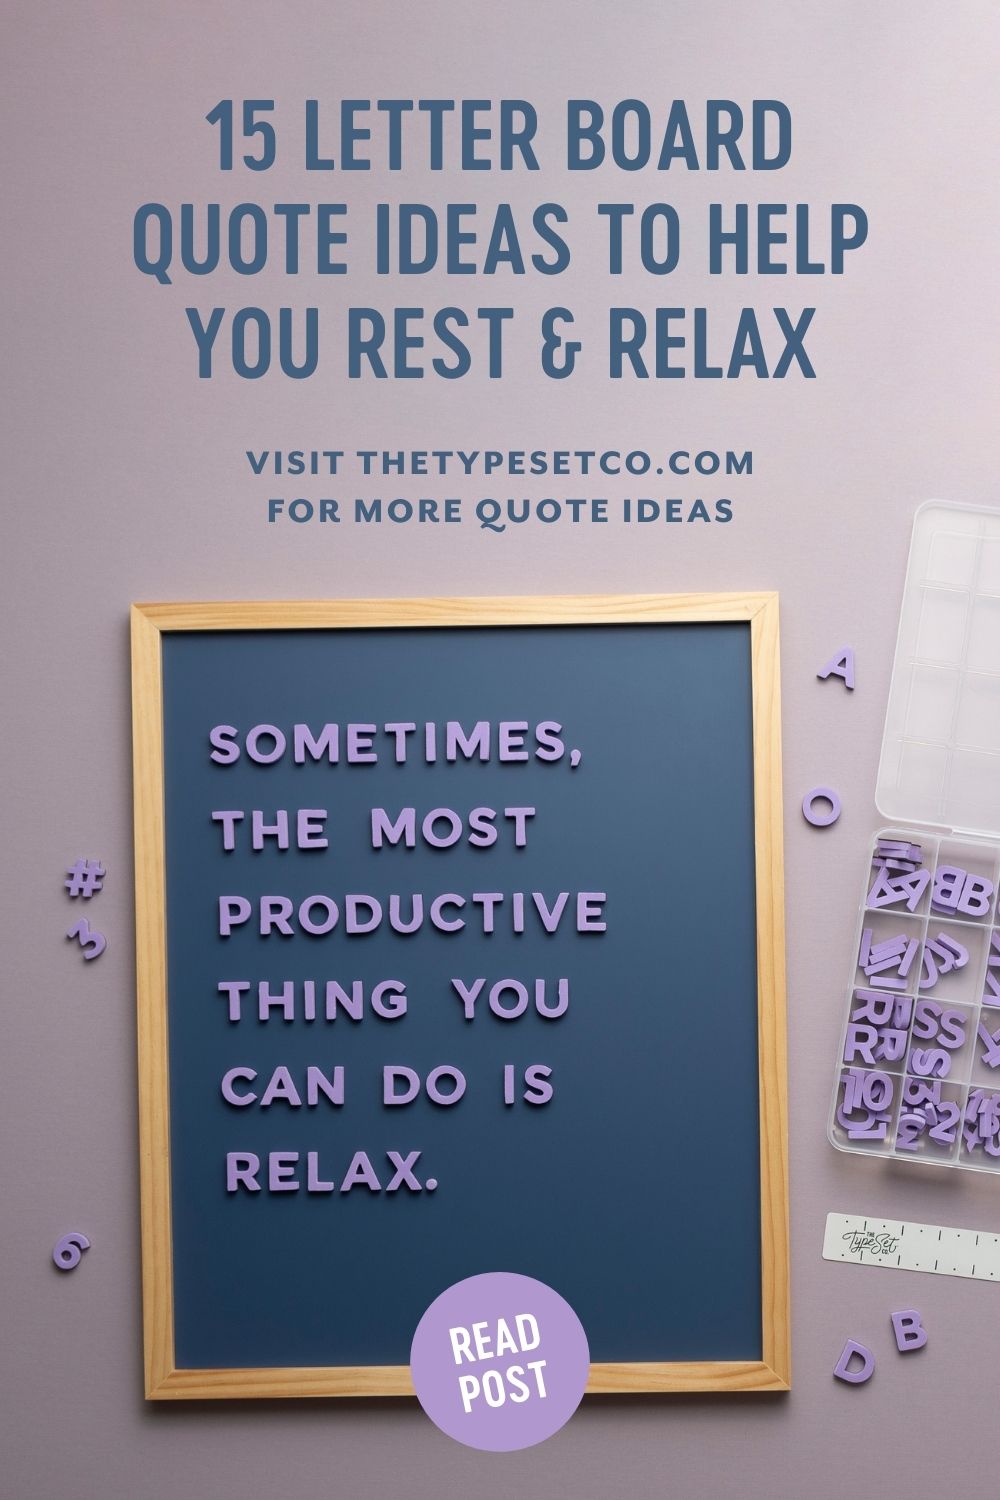 Letterboard Quote Ideas About Rest & Relaxation